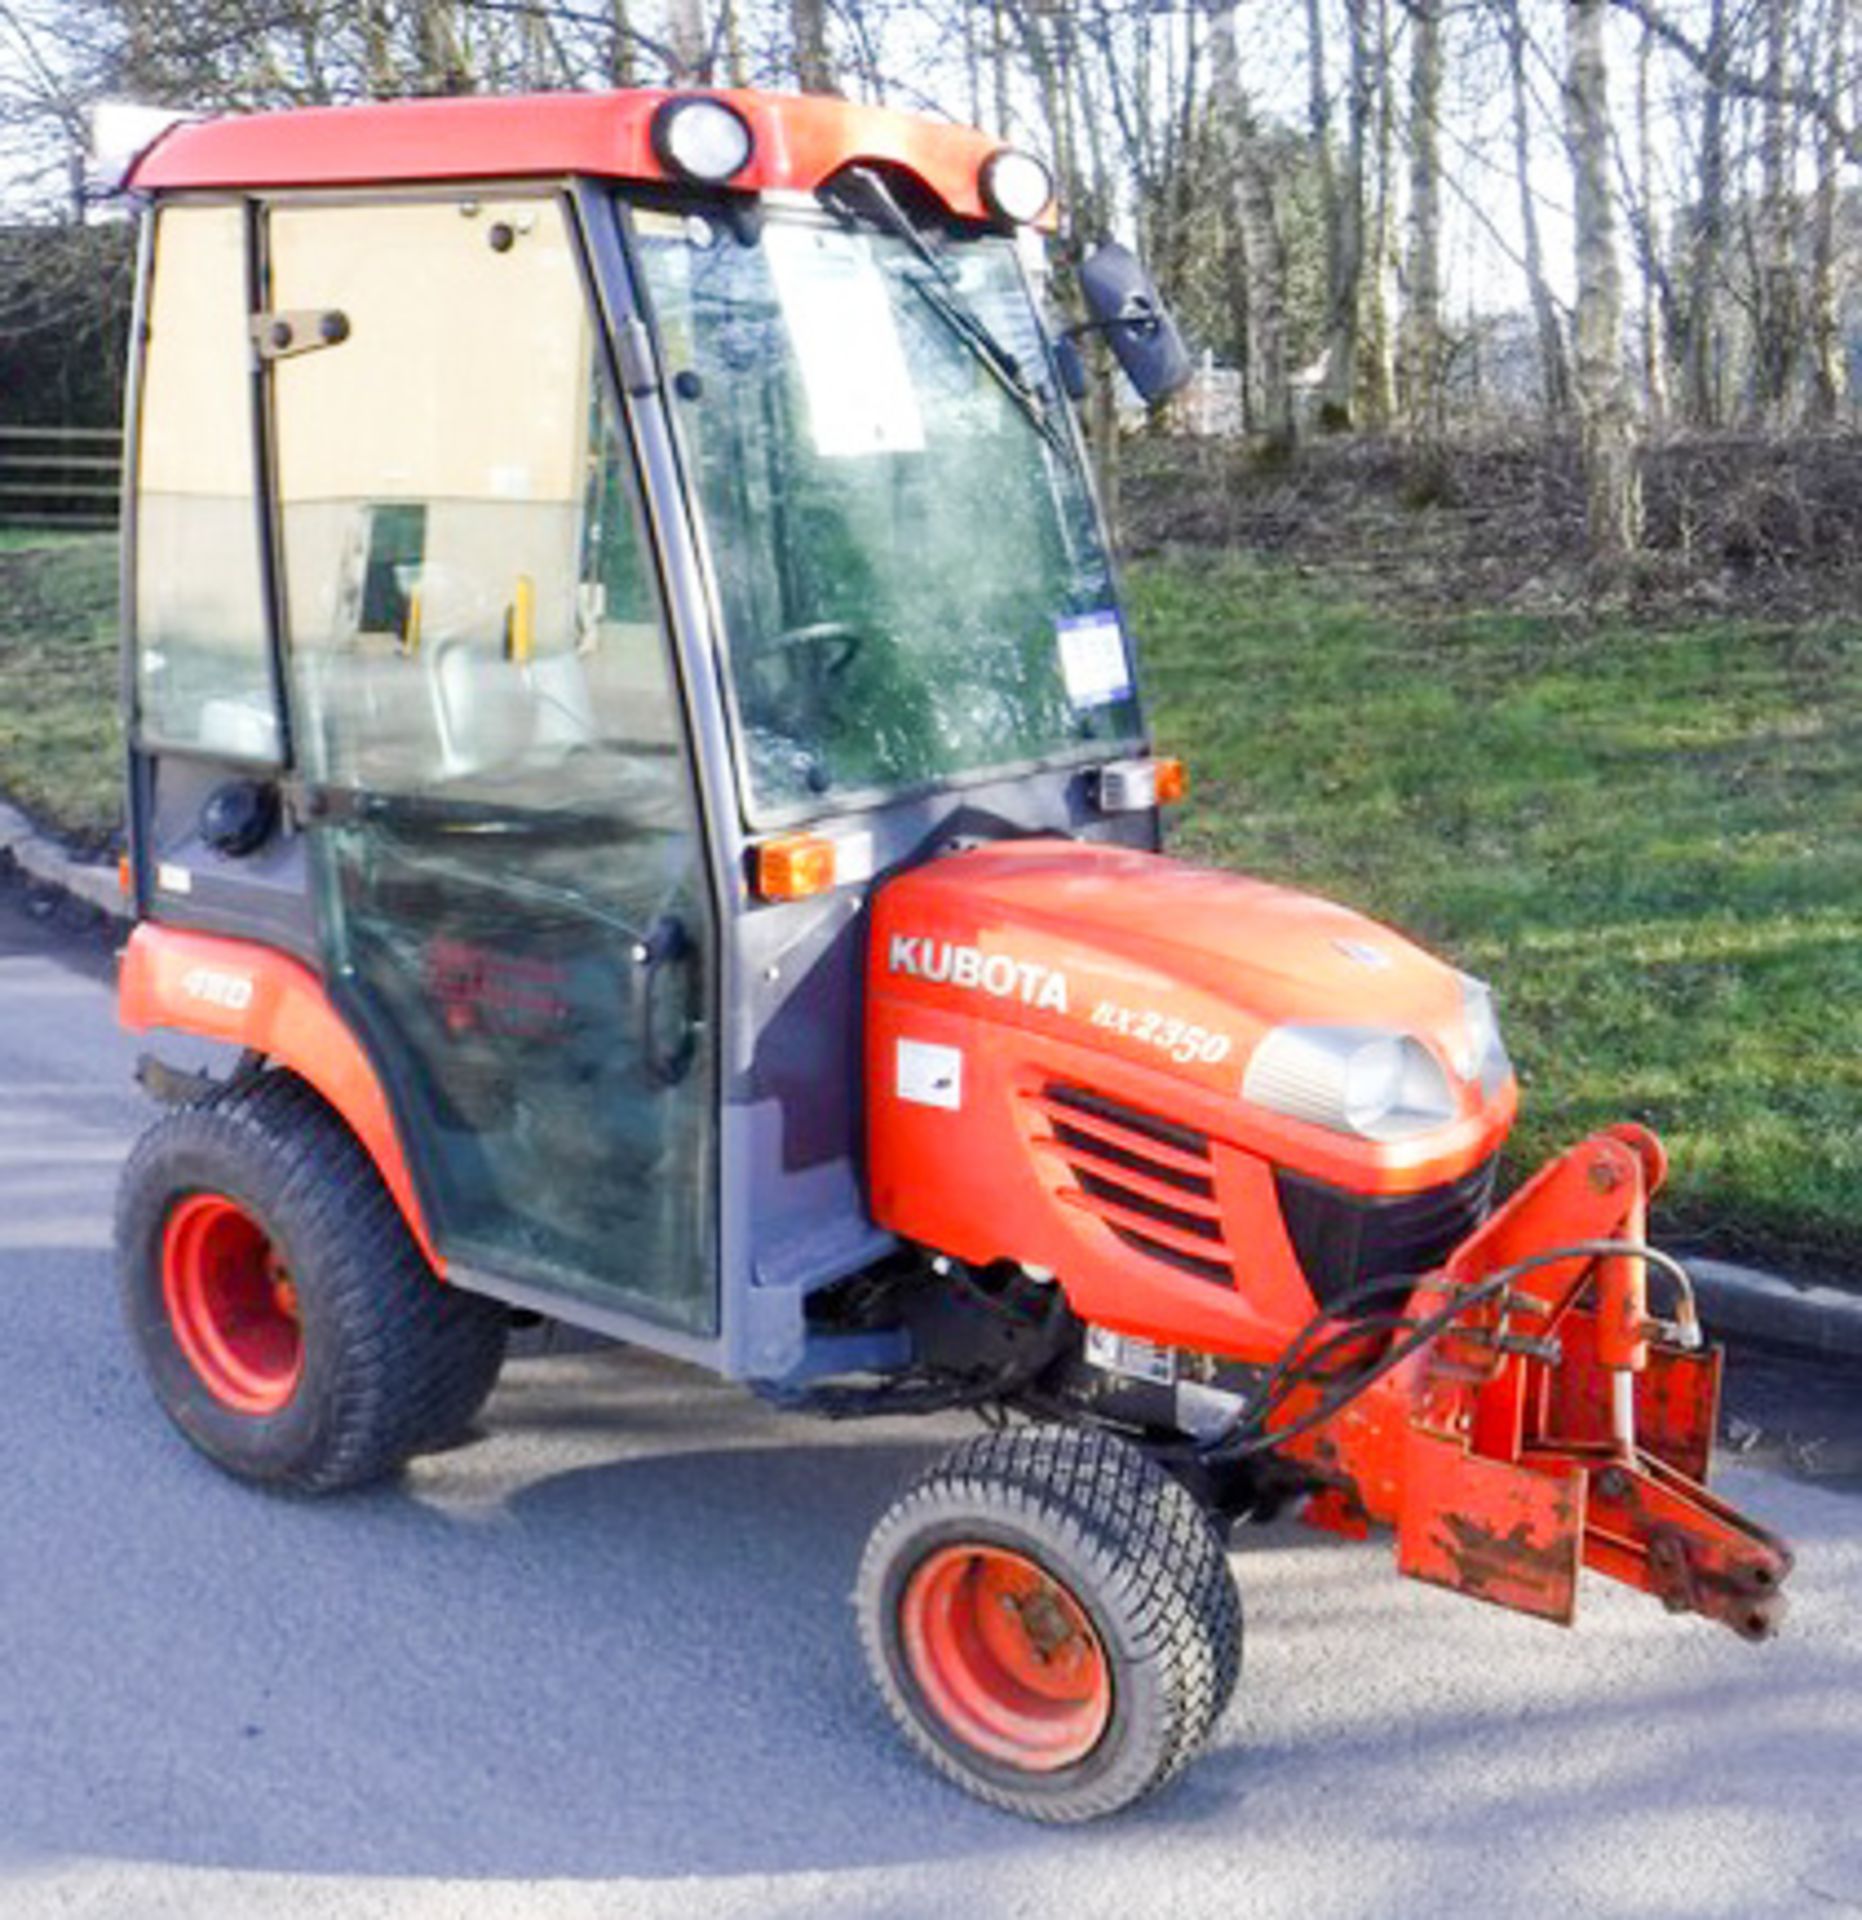 2011 KUBOTA BX2350 MINI TRACTOR REG SN61EJE, 238.7HRS (NOT VERIFIED) DOCUMENTS IN OFFICE